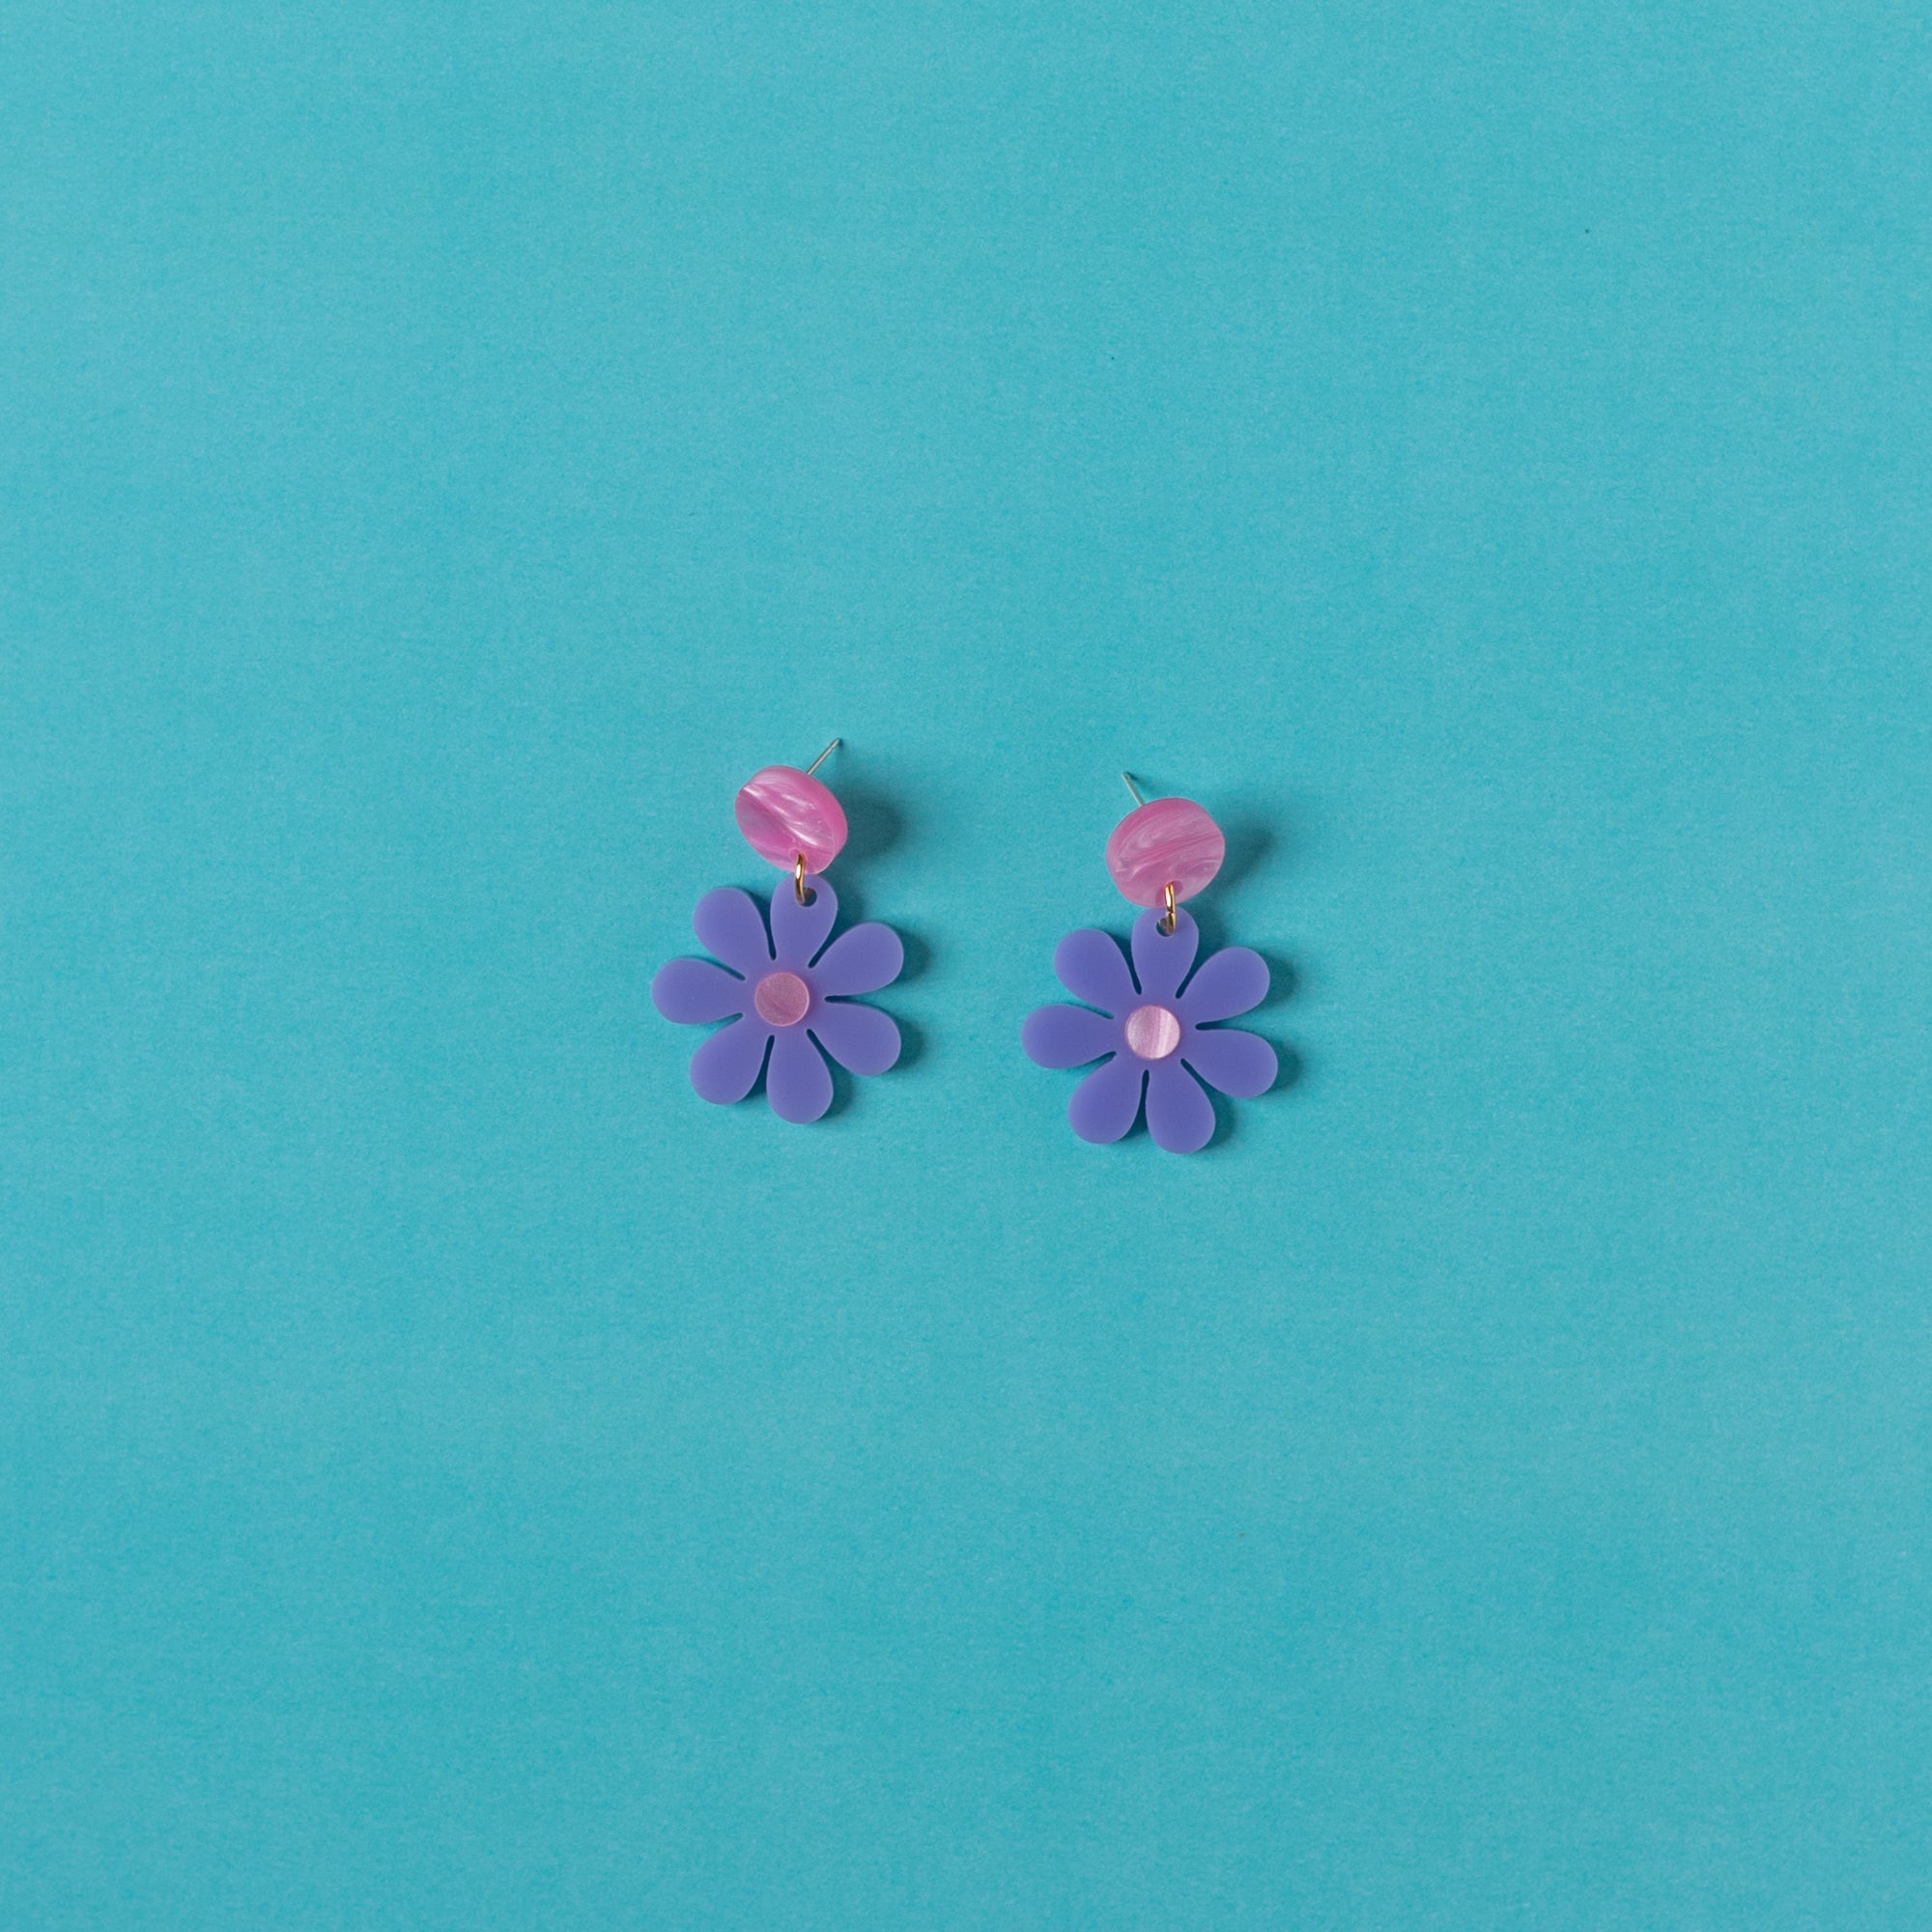 The Baby Daisy Hanging Stud Earrings